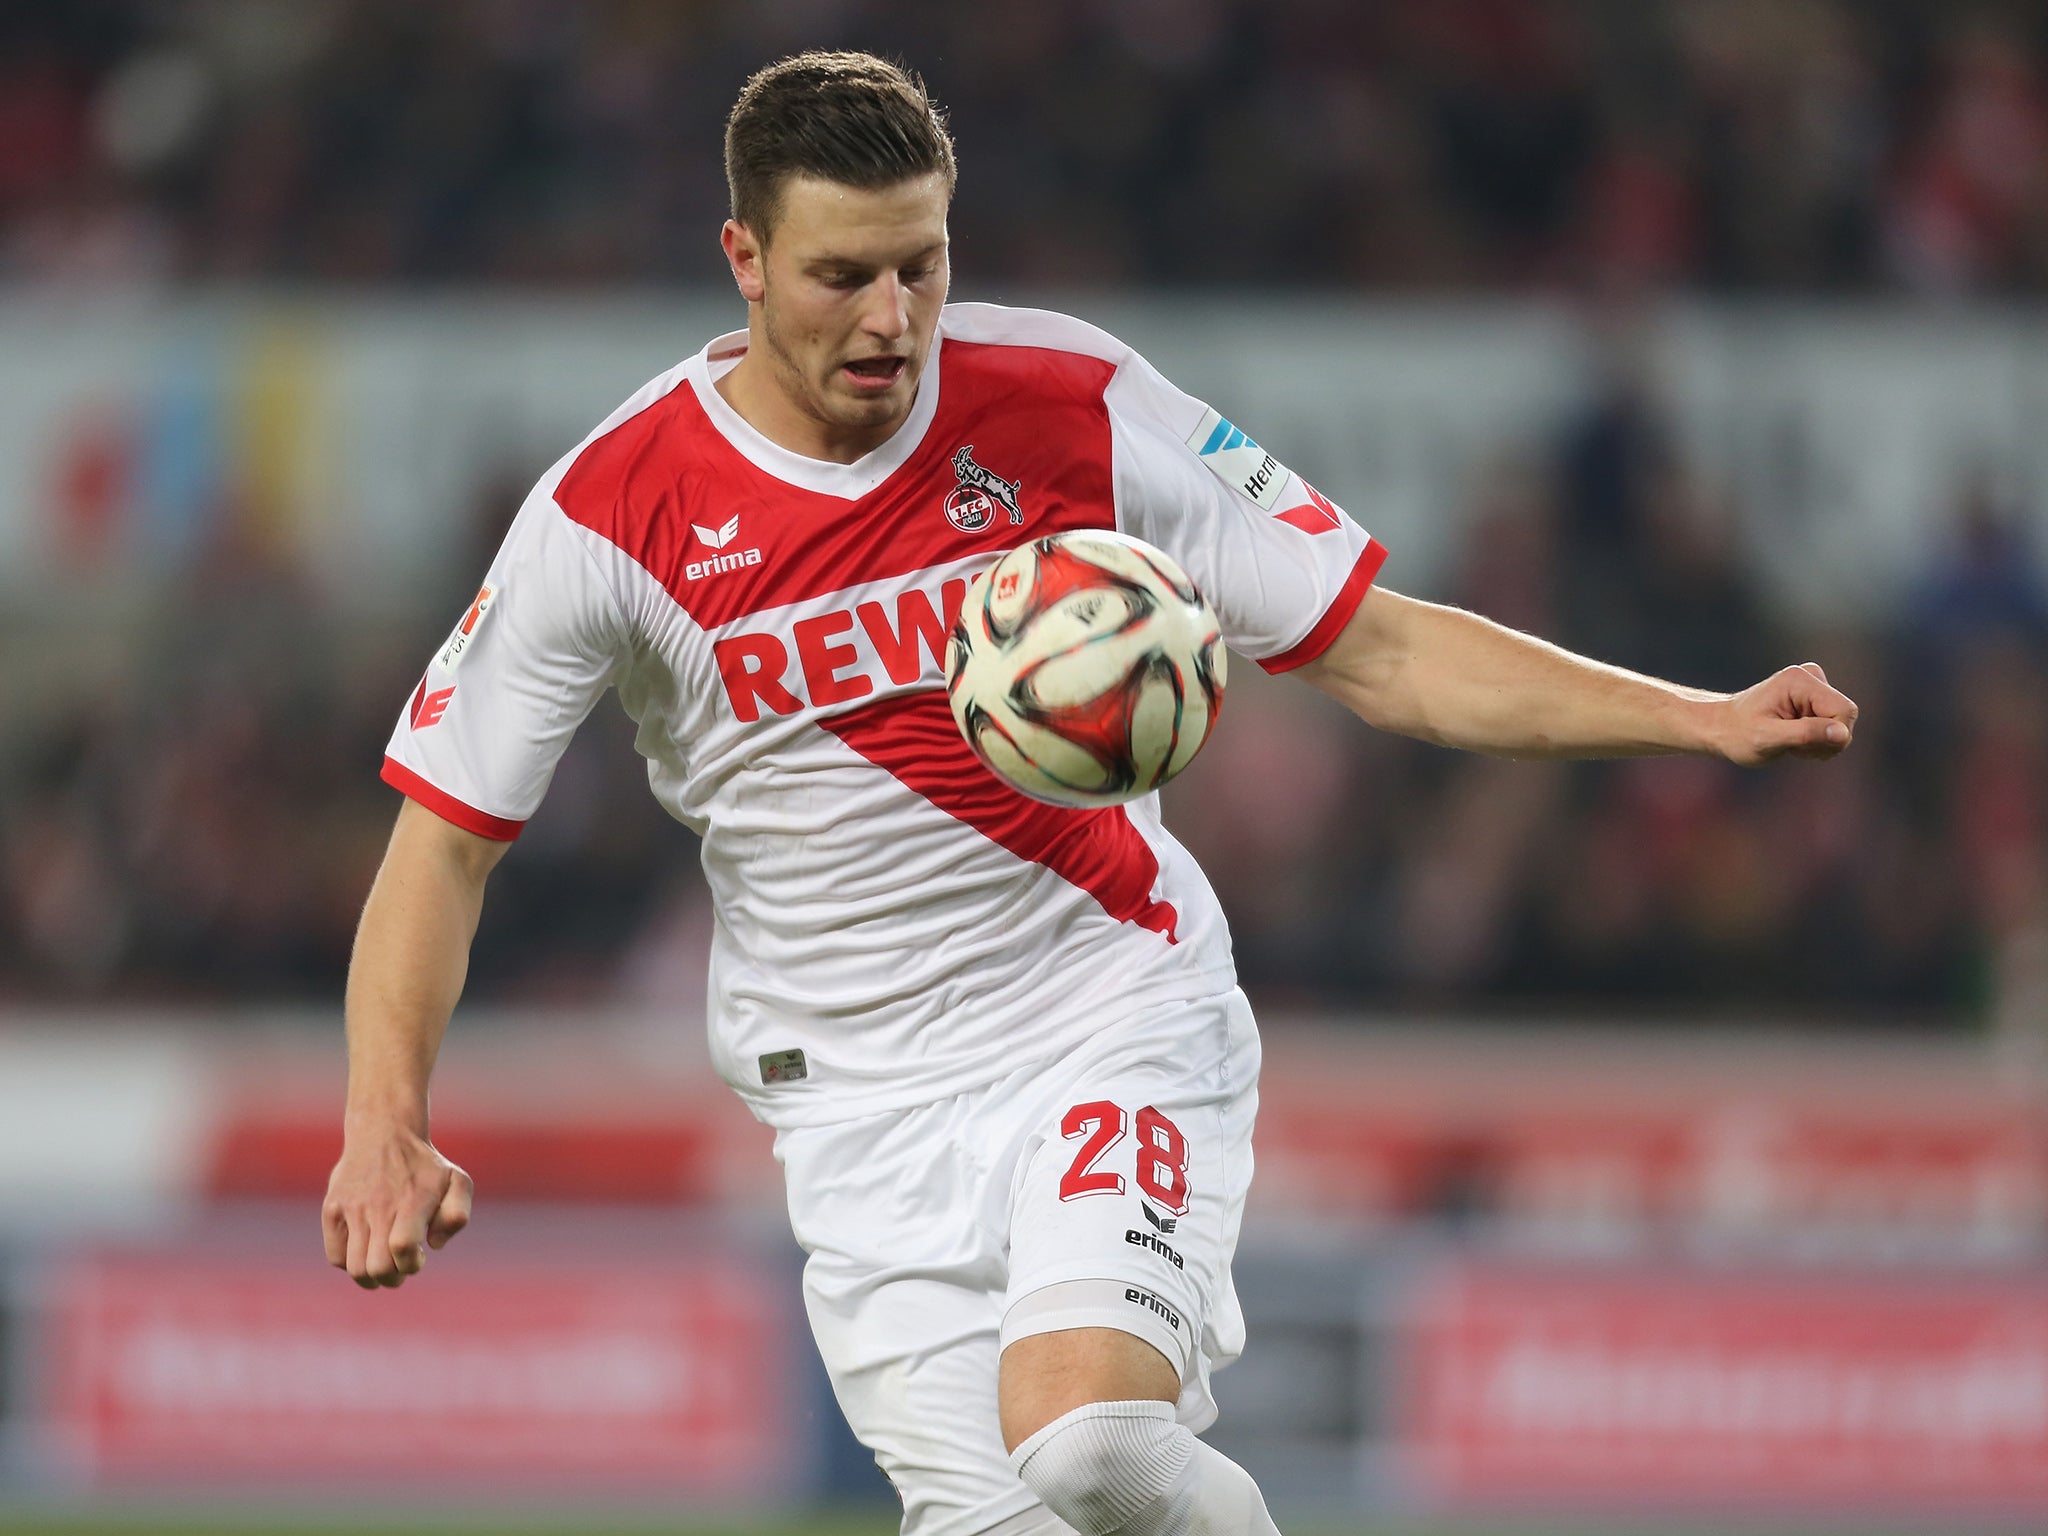 Kevin Wimmer has been linked with a move to Tottenham